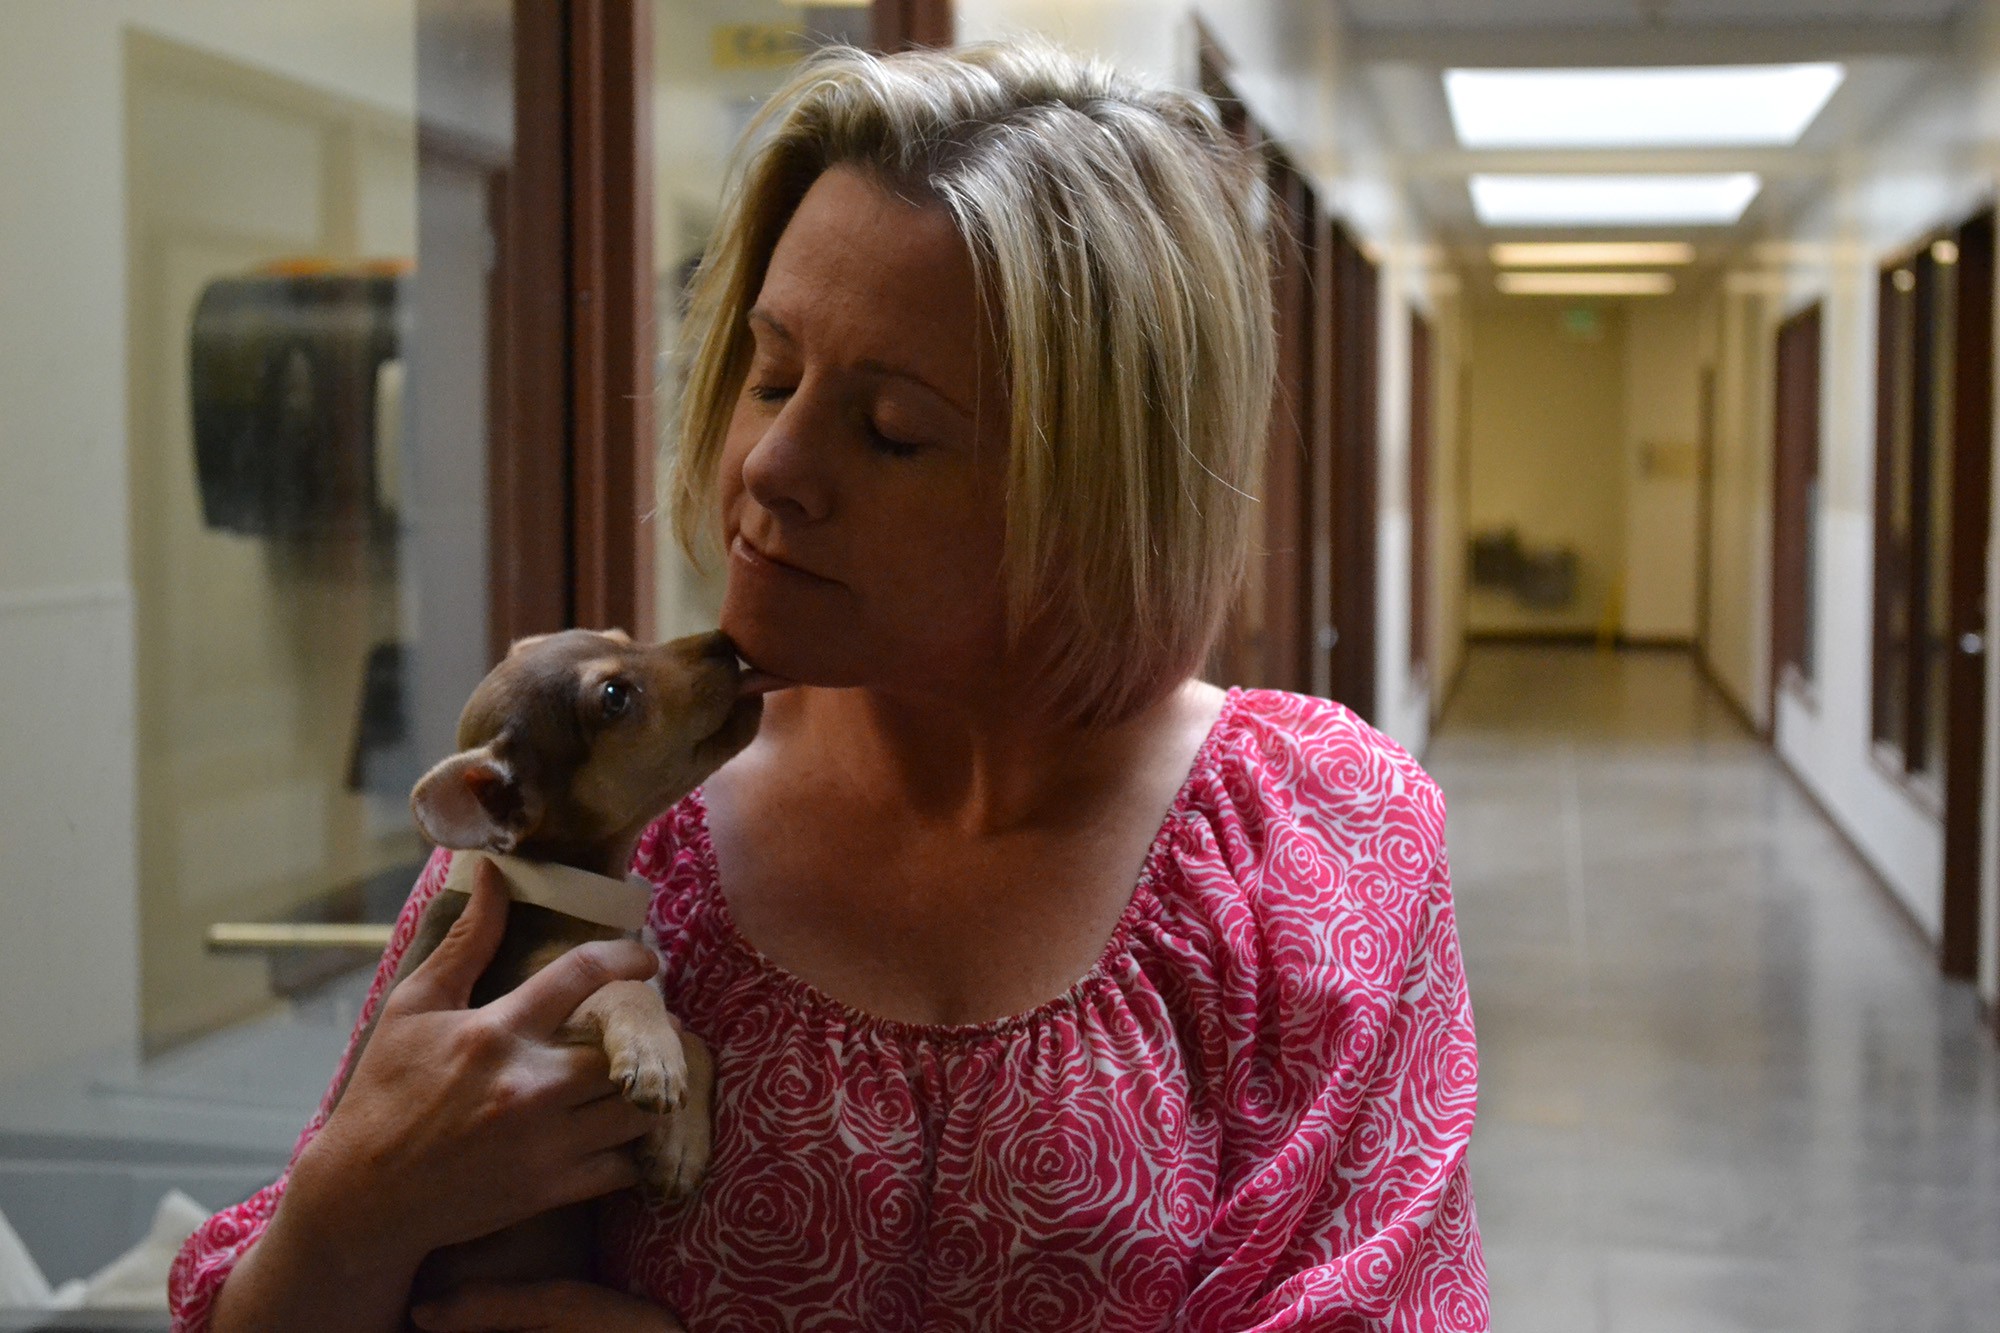 Melissa Gable, public information officer at the Maricopa County Animal Care and Control, said there are so many chihuahuas and chihuahua mixes up for adoption that moving them to other states offers them a better chance of finding homes.